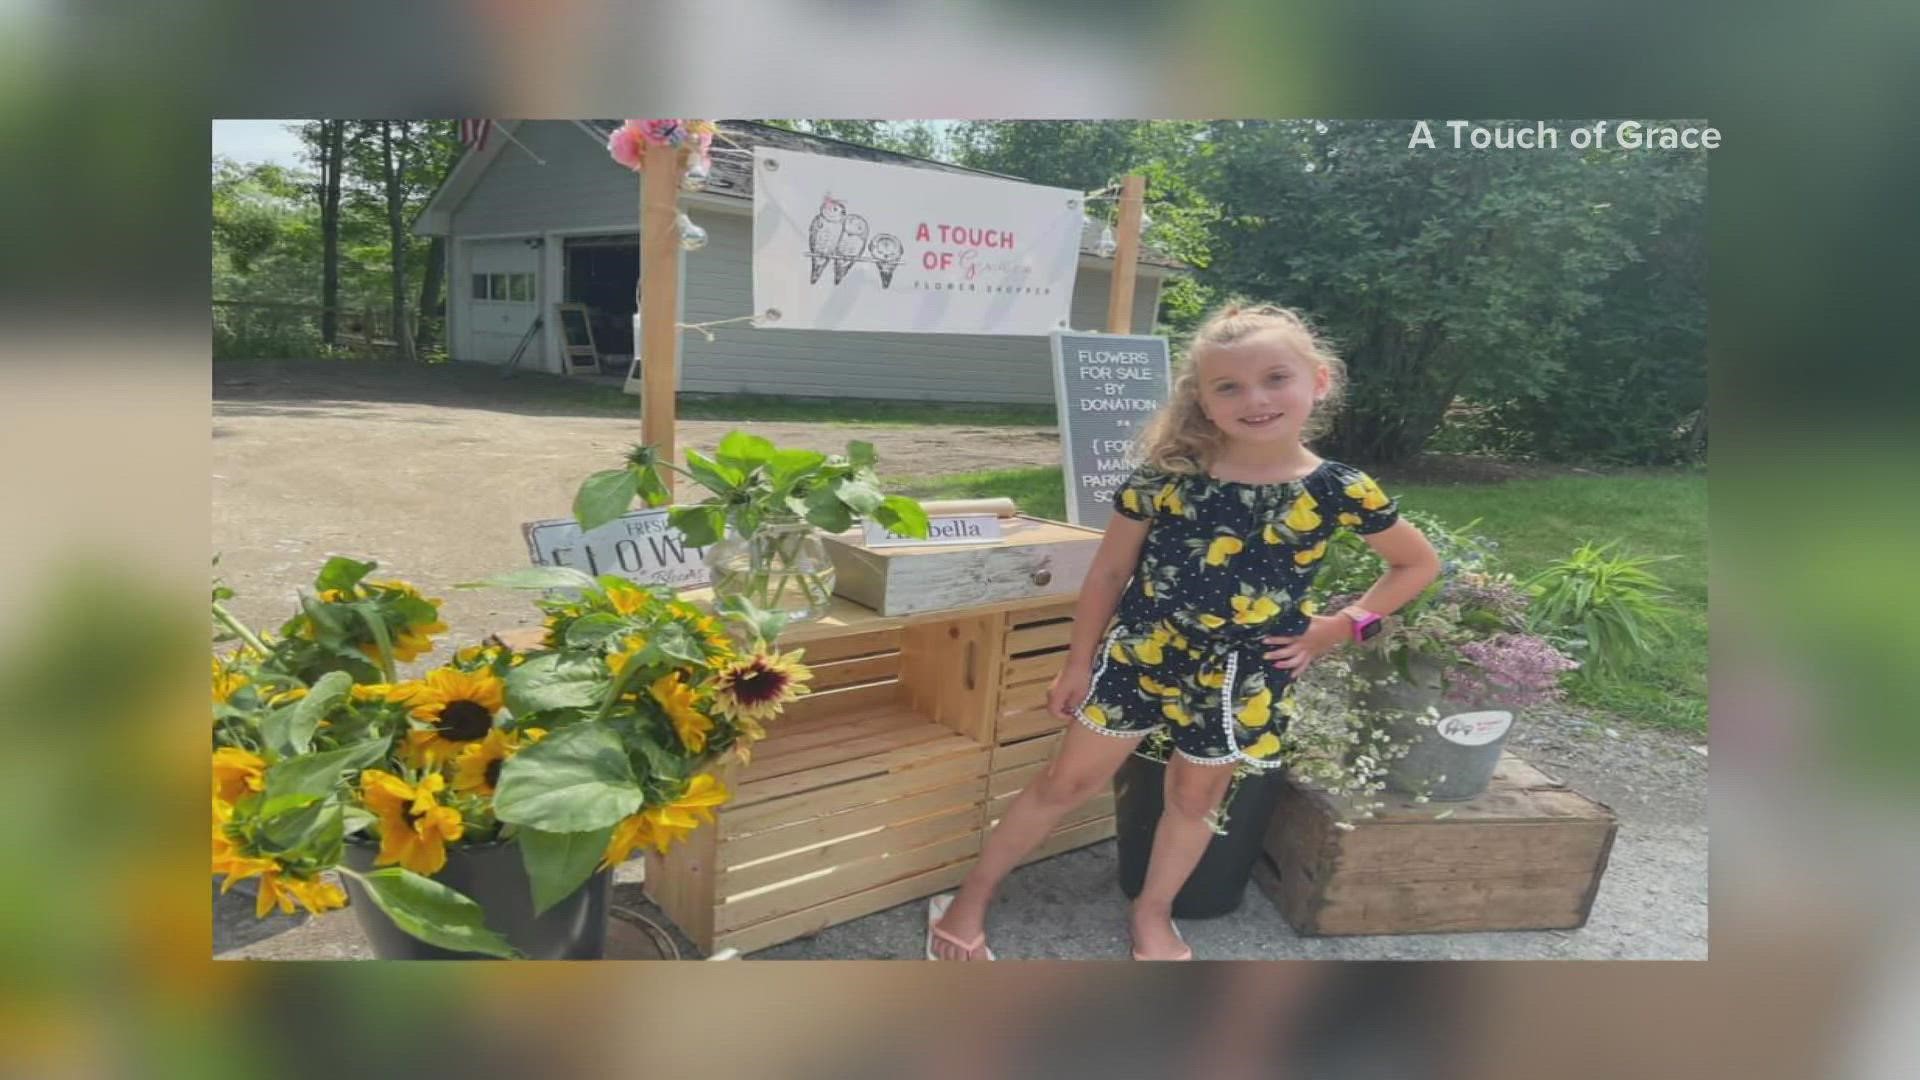 Arabella started two years ago with a modest flower stand, donating all the money she made to charity. This year, she's upping her game with a full shop.